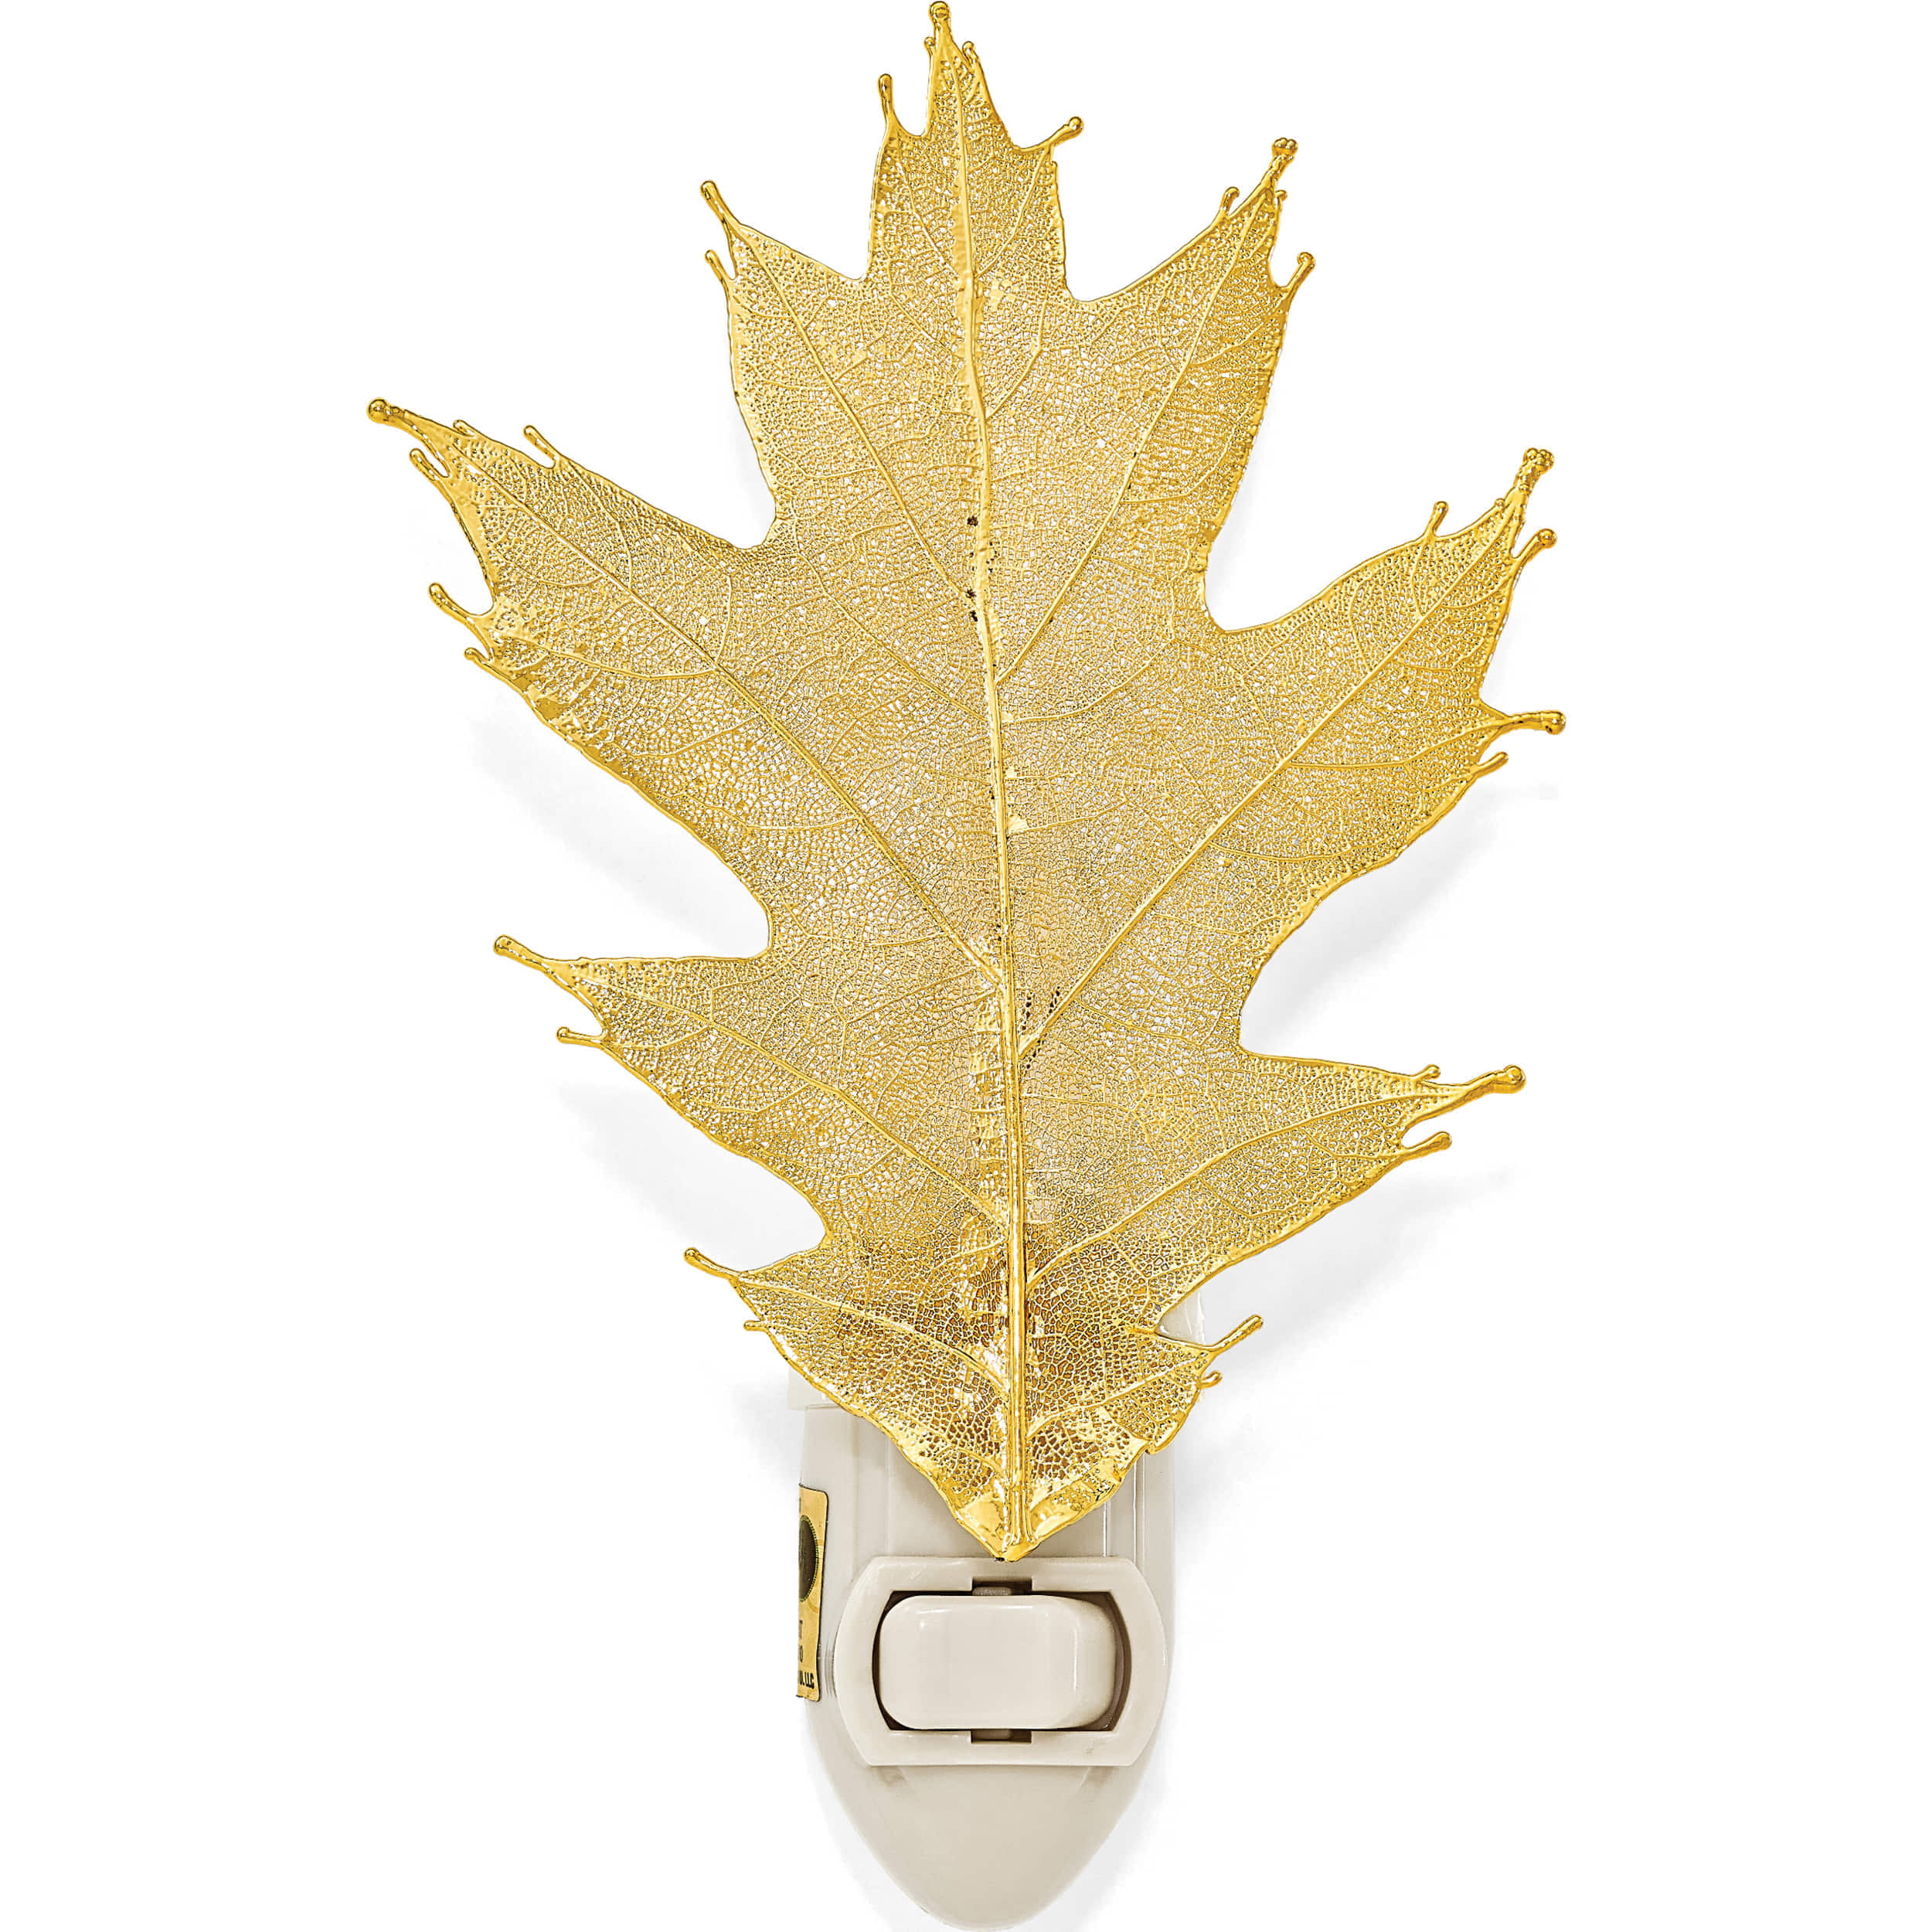 Comes Gift Boxed Oak Real Leaf Ornaments Dipped in 24k Gold 